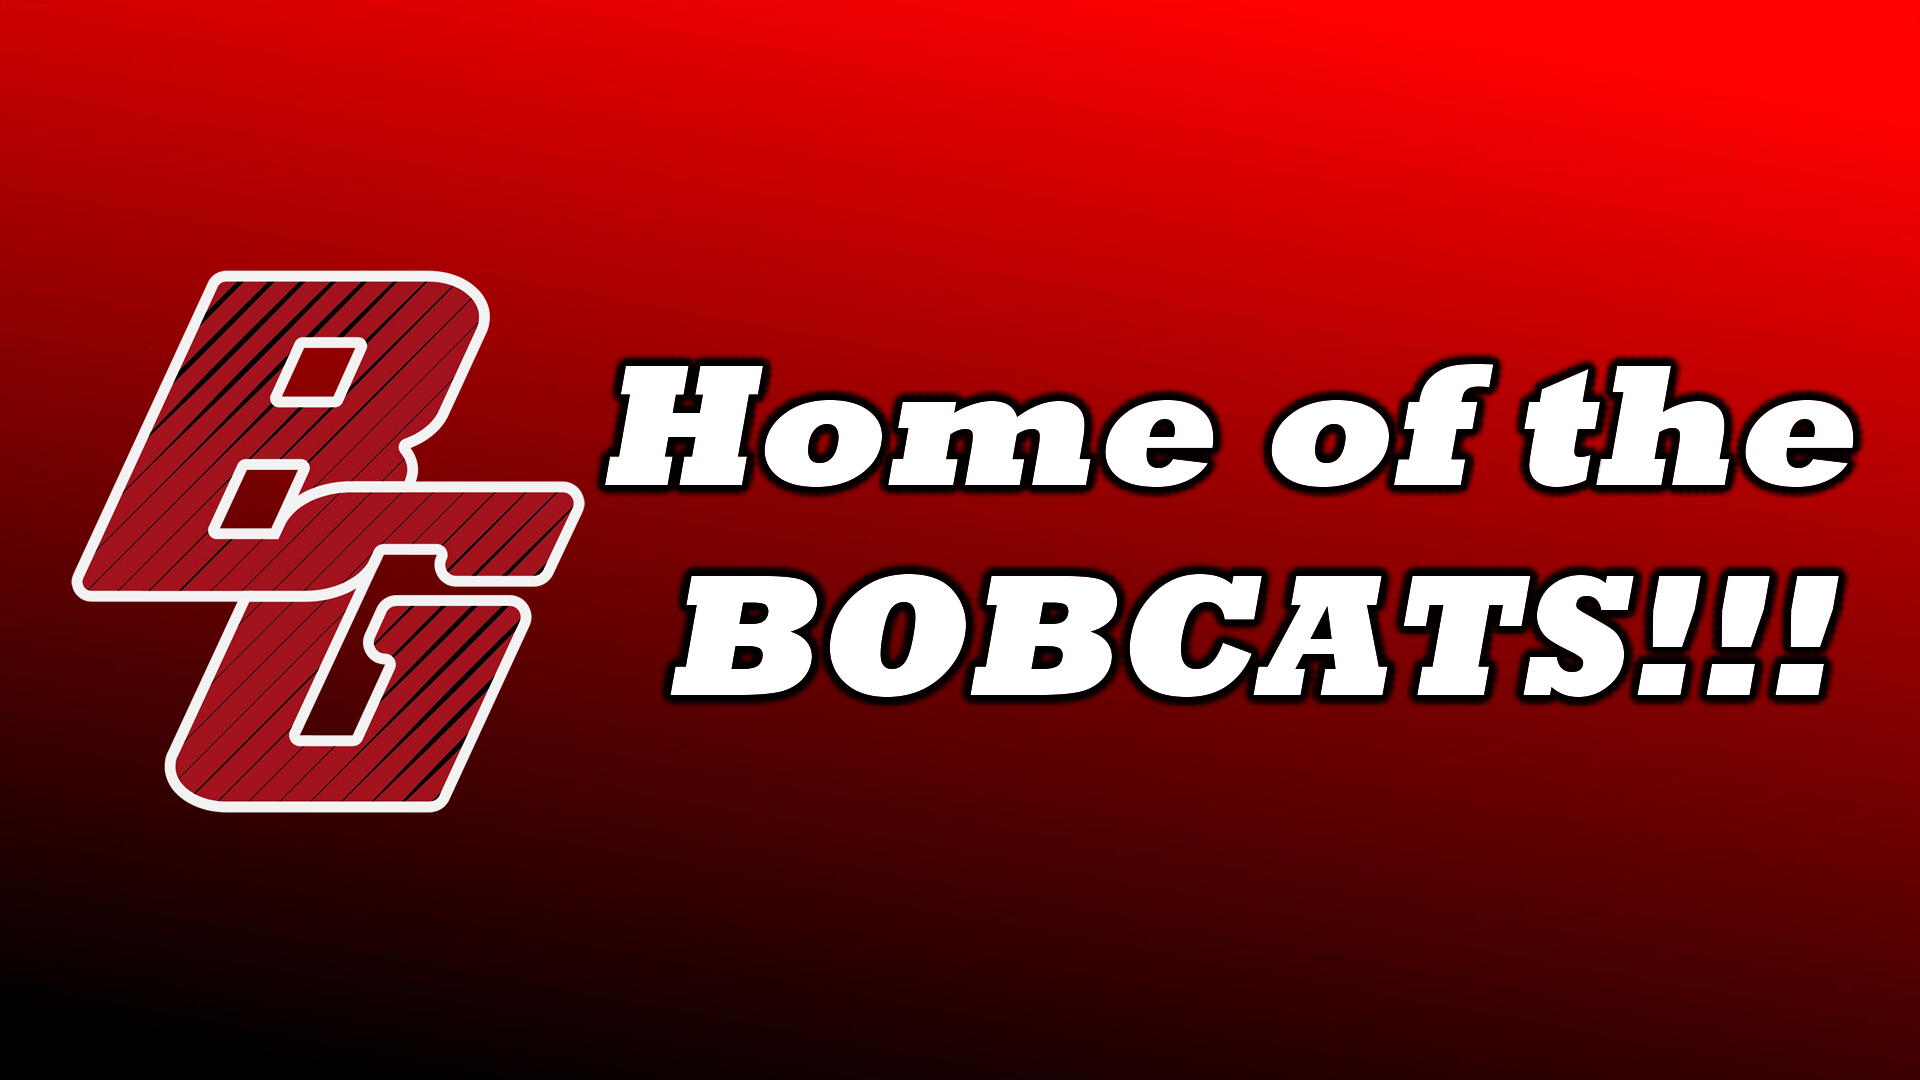 Home of the bobcats